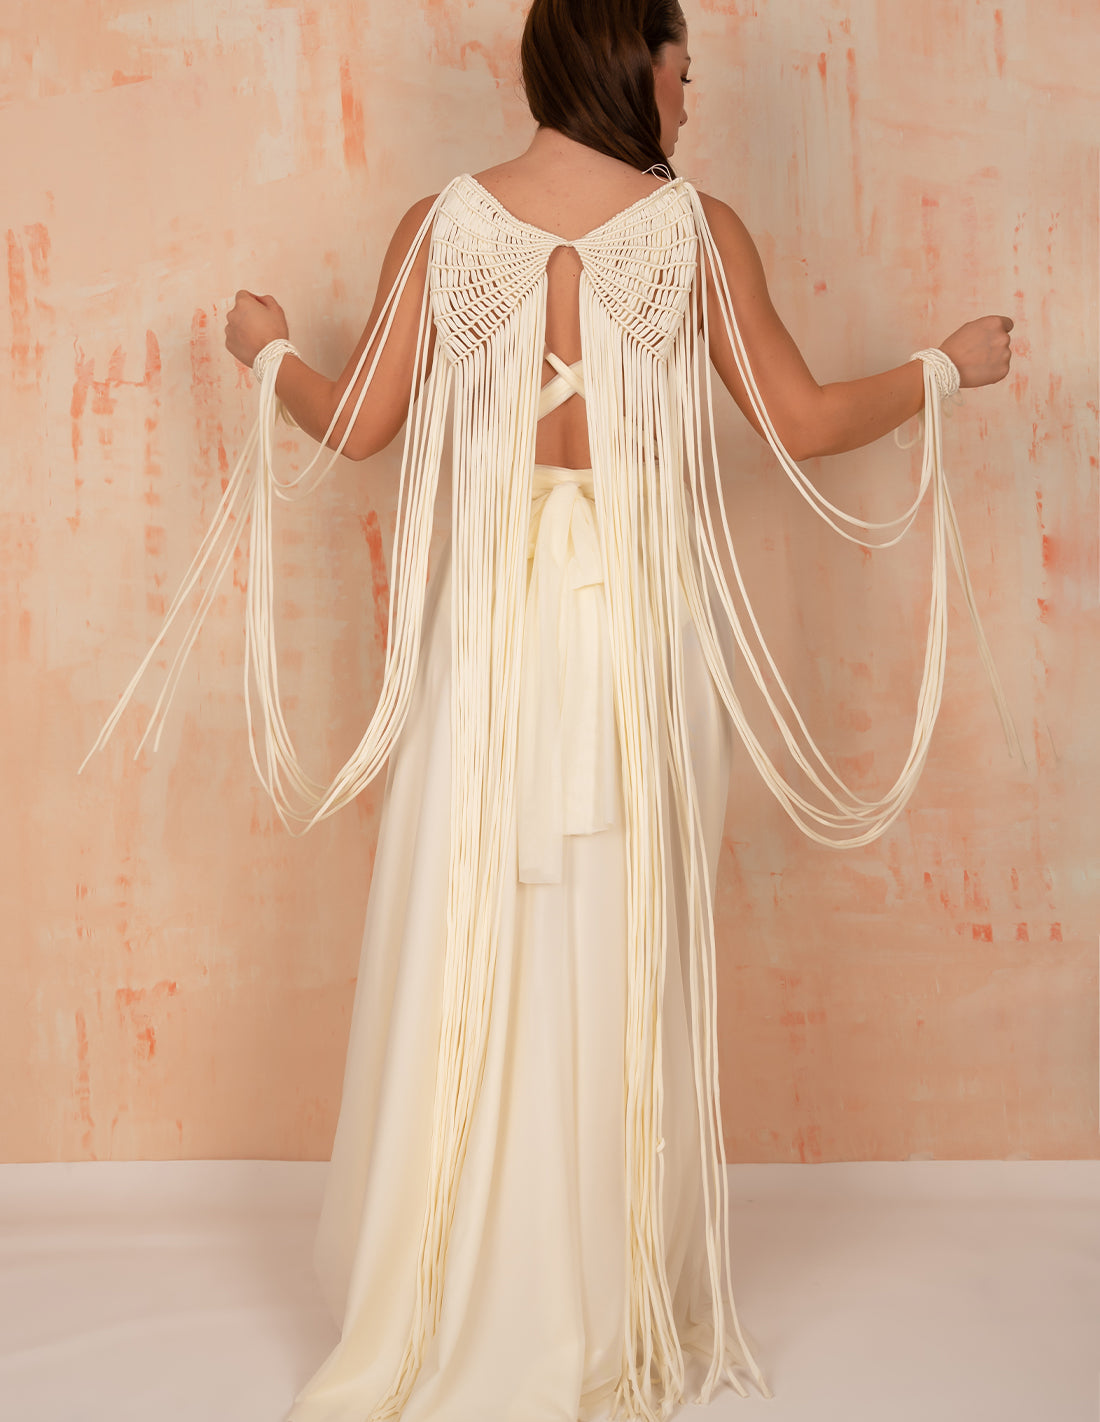 Dream Wings Ivory. Wings With Hand Woven Macramé In Ivory. Entreaguas